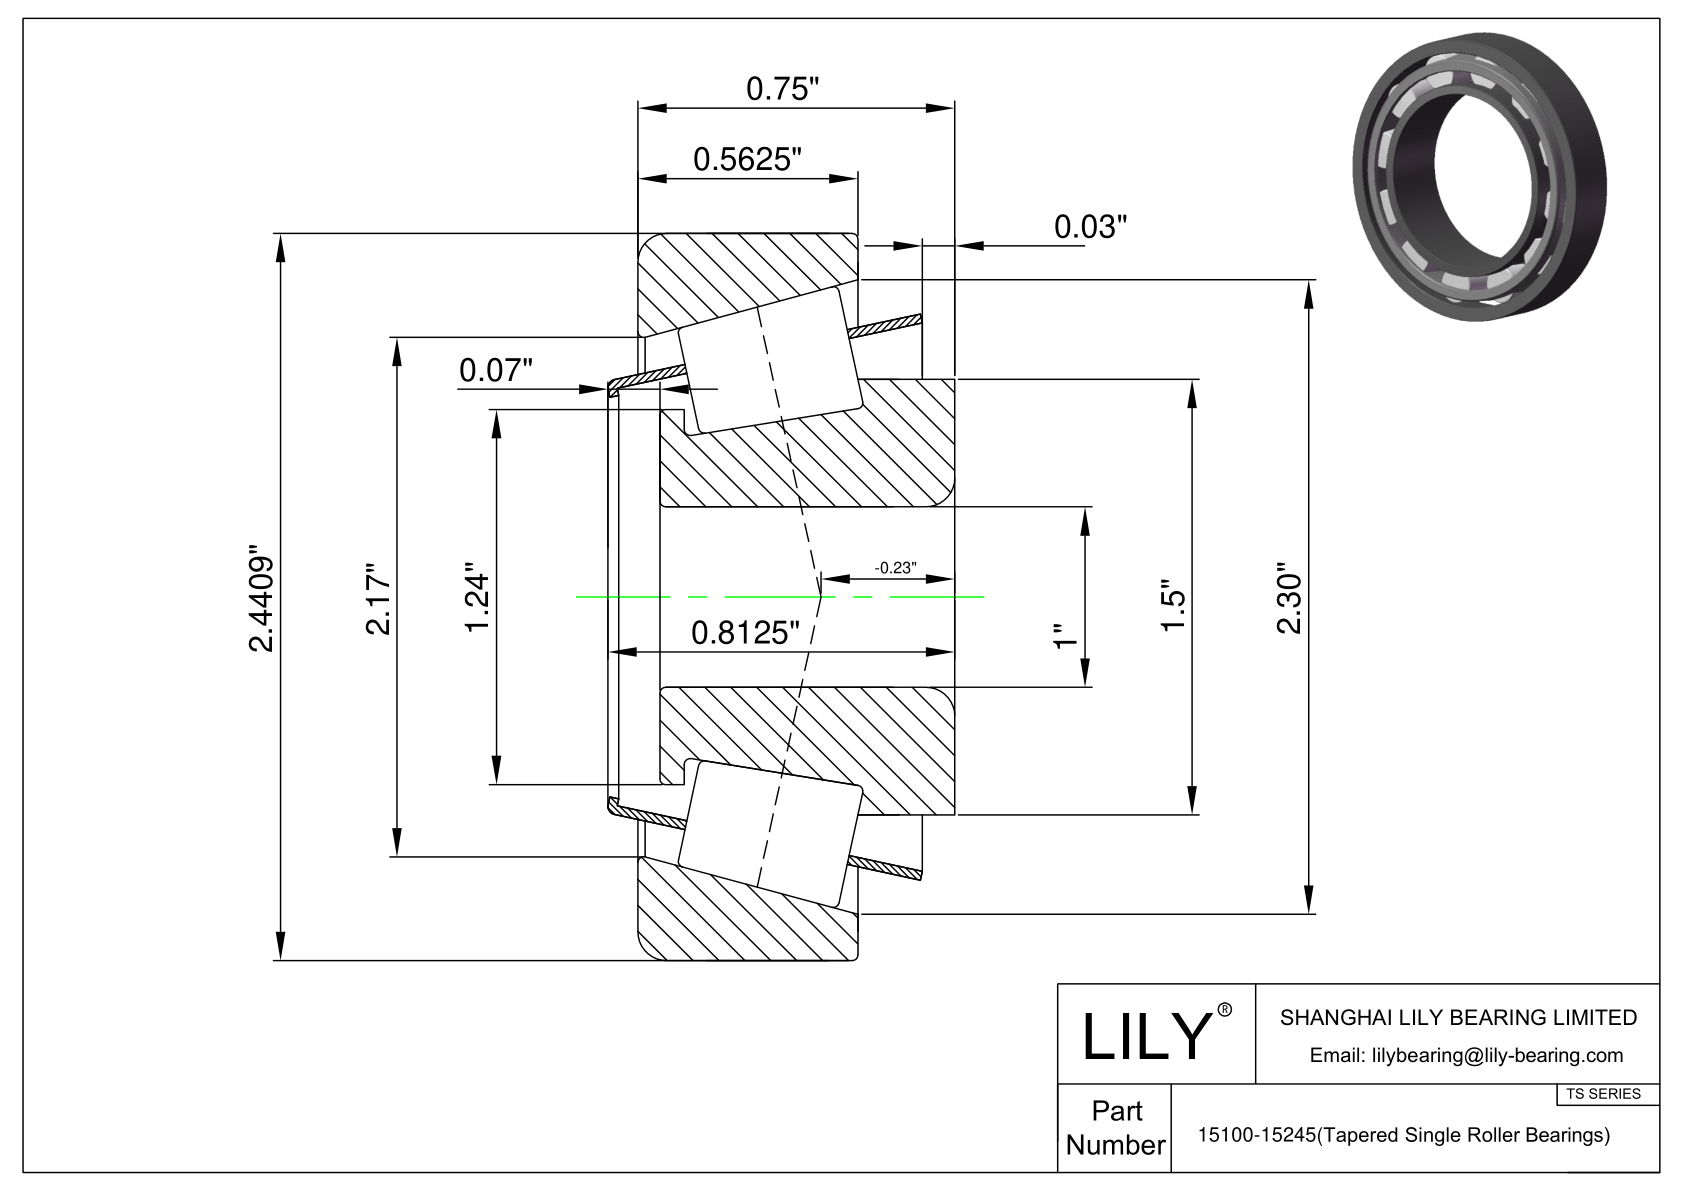 15100-15245 TS (Tapered Single Roller Bearings) (Imperial) cad drawing